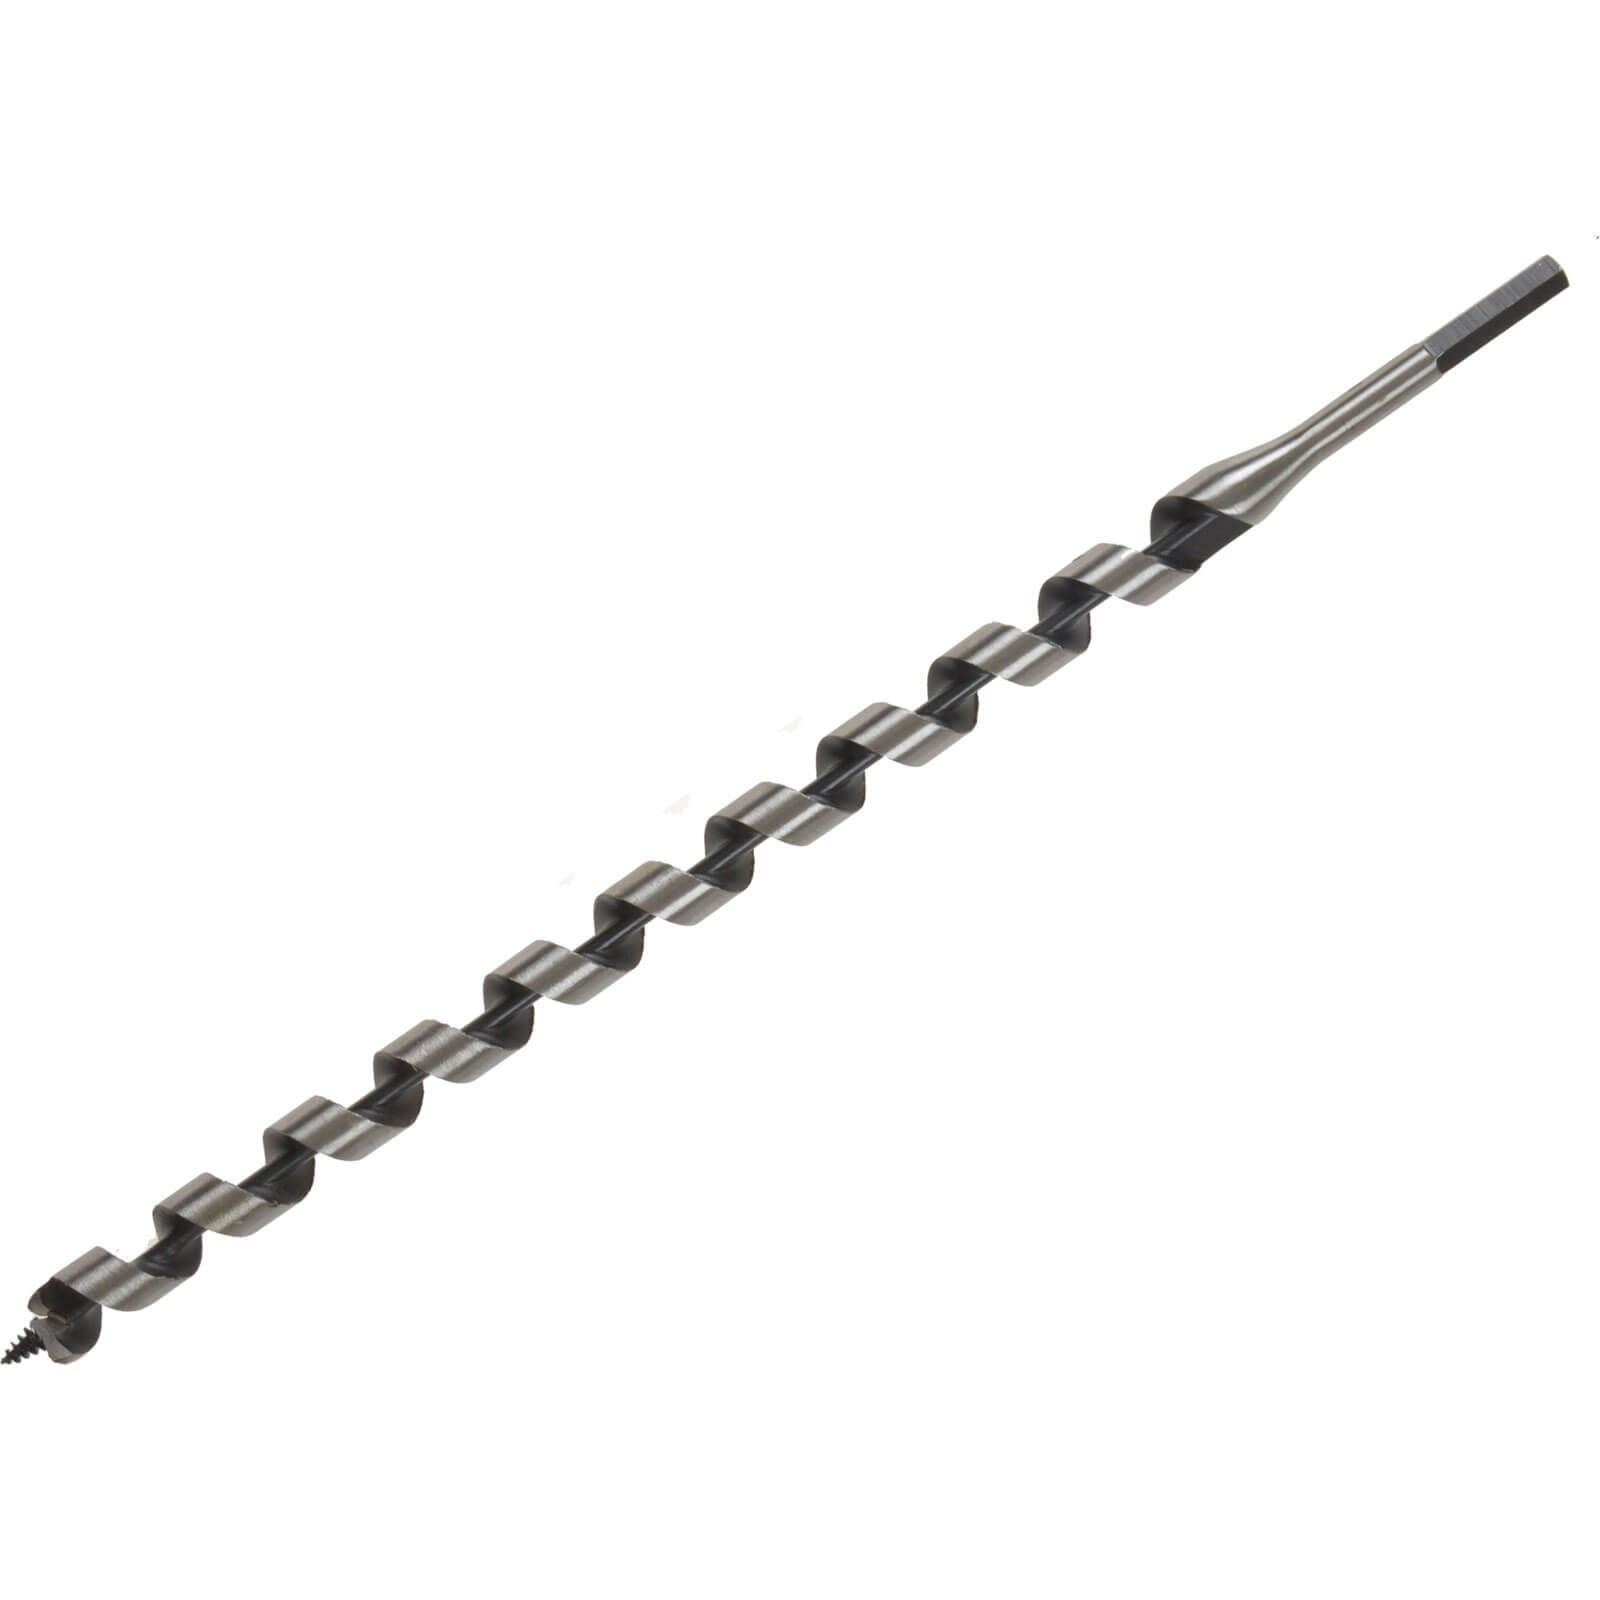 Image of Irwin Wood Auger Drill Bit 35mm 400mm